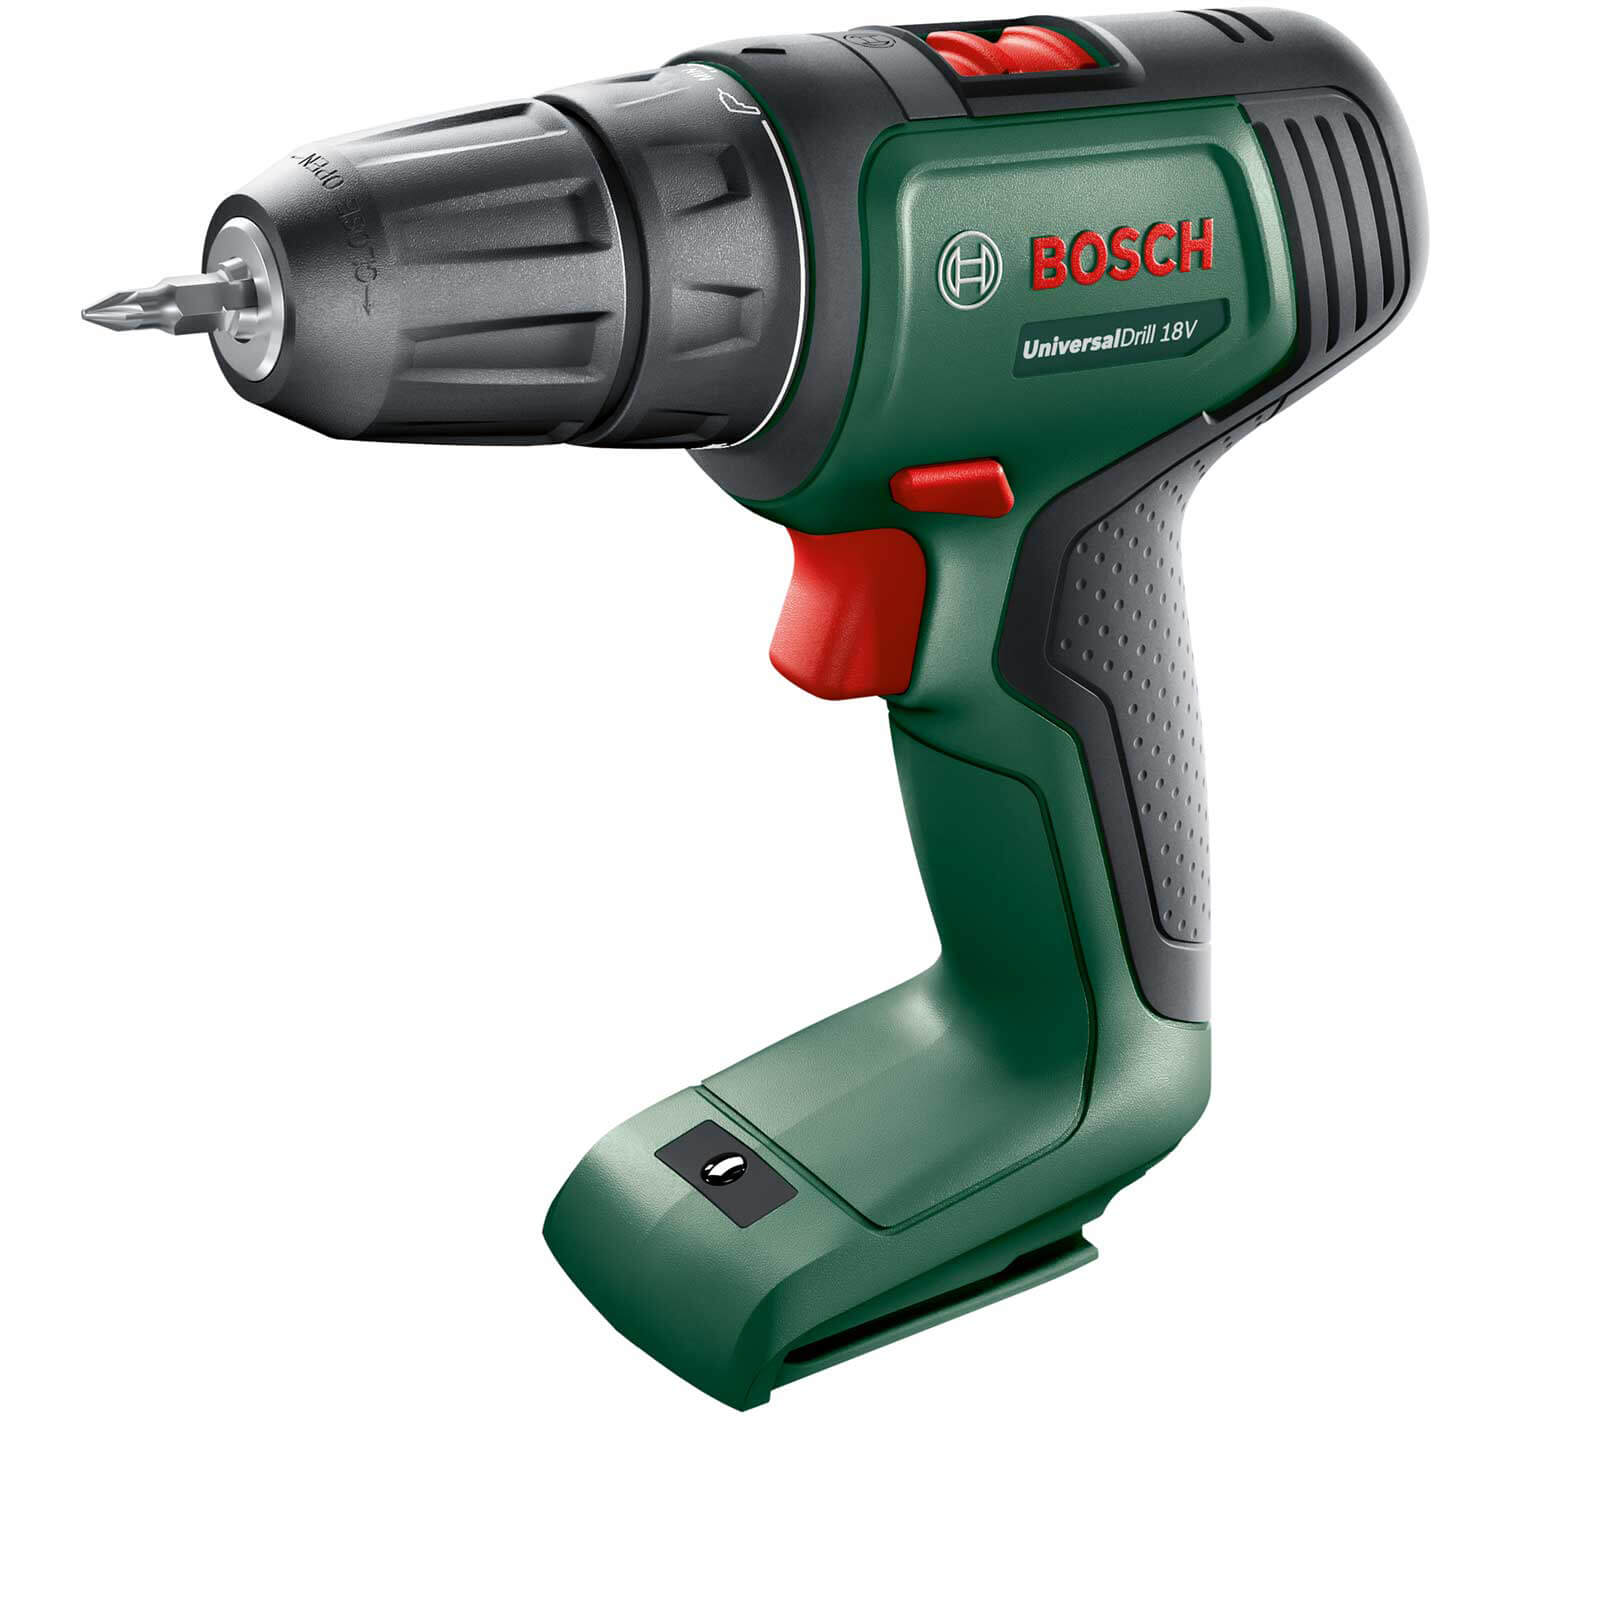 Image of Bosch UNIVERSALDRILL 18v Cordless Drill Driver No Batteries No Charger No Case